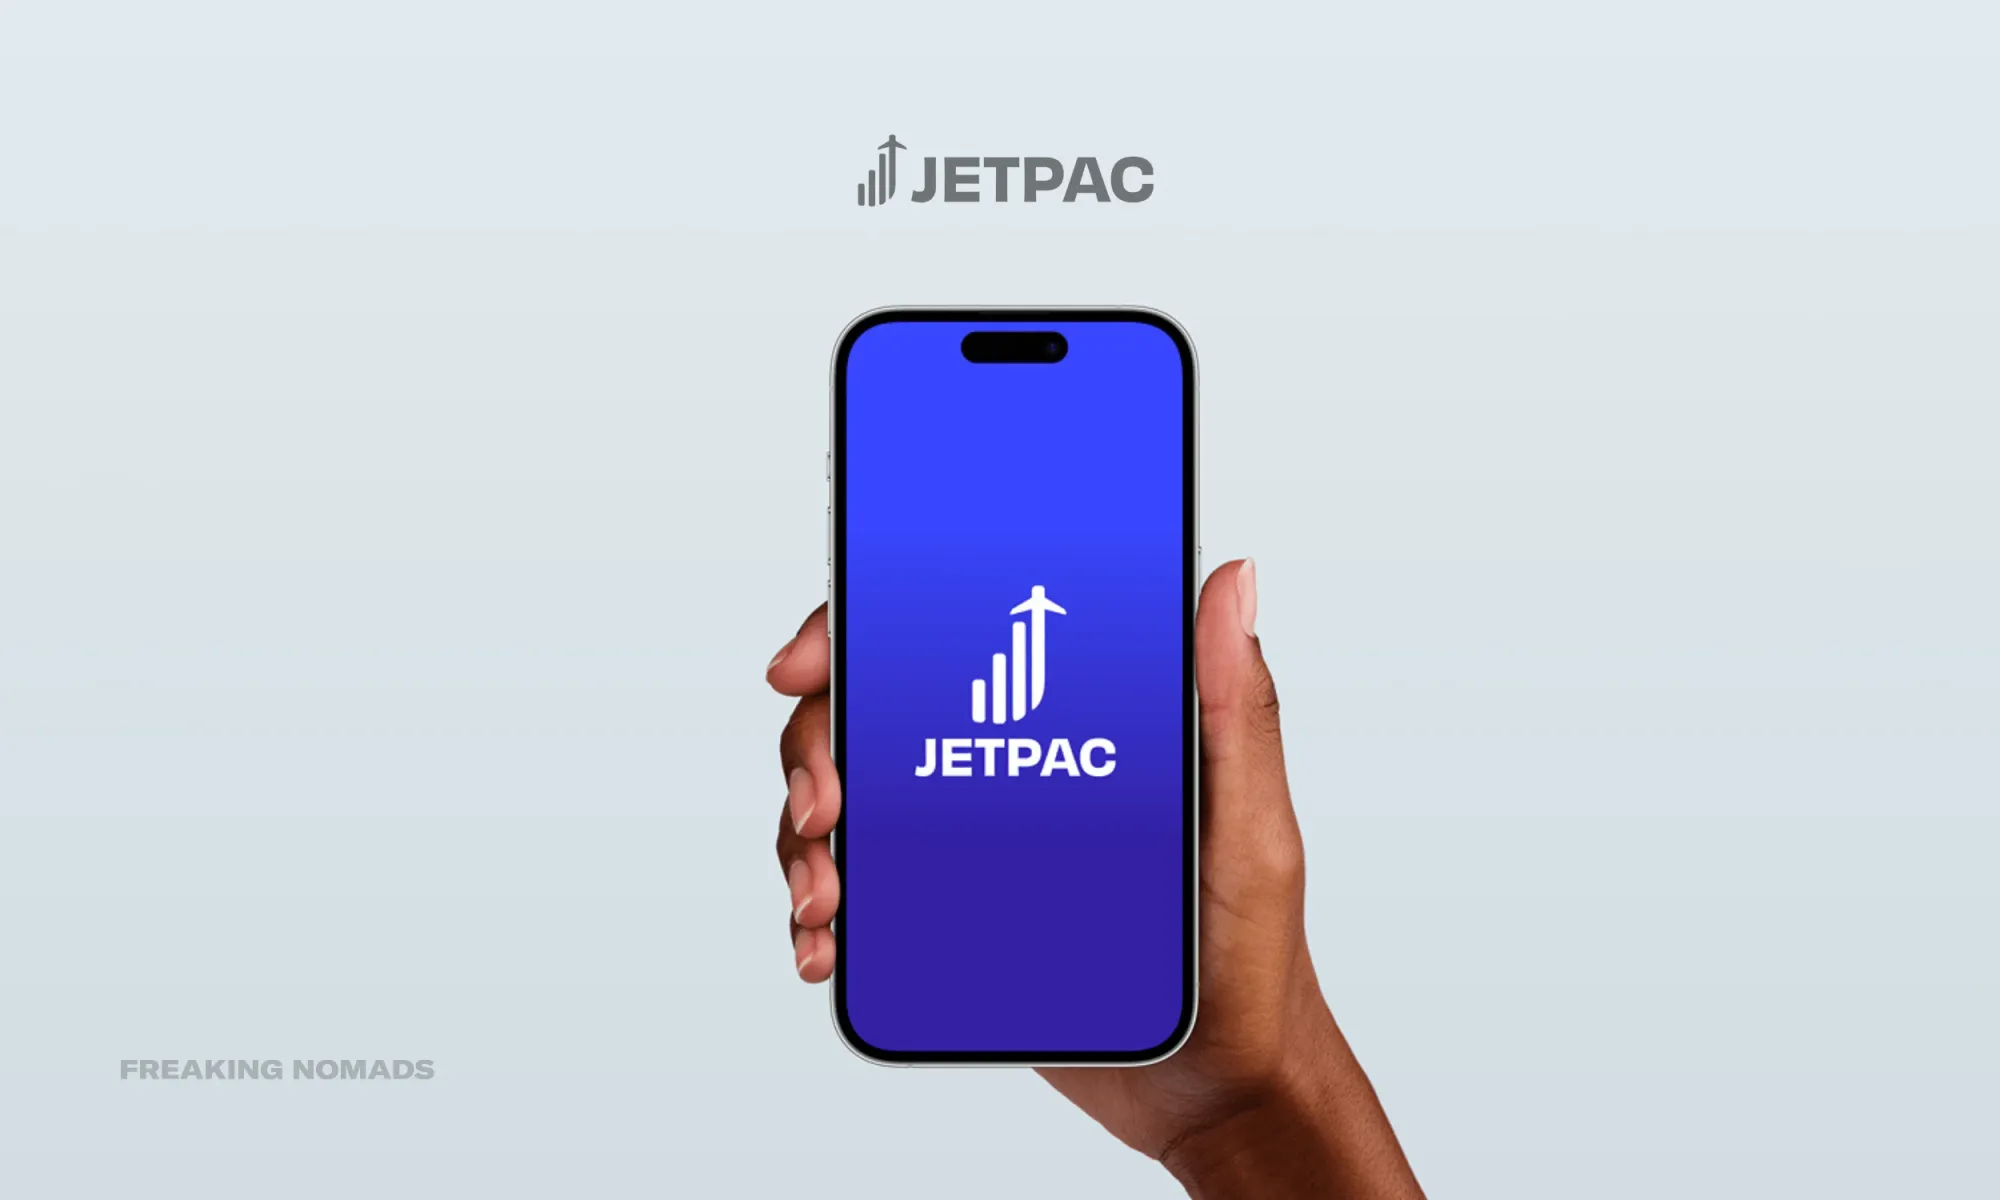 Jetpac eSIM app on an iPhone held by a human hand